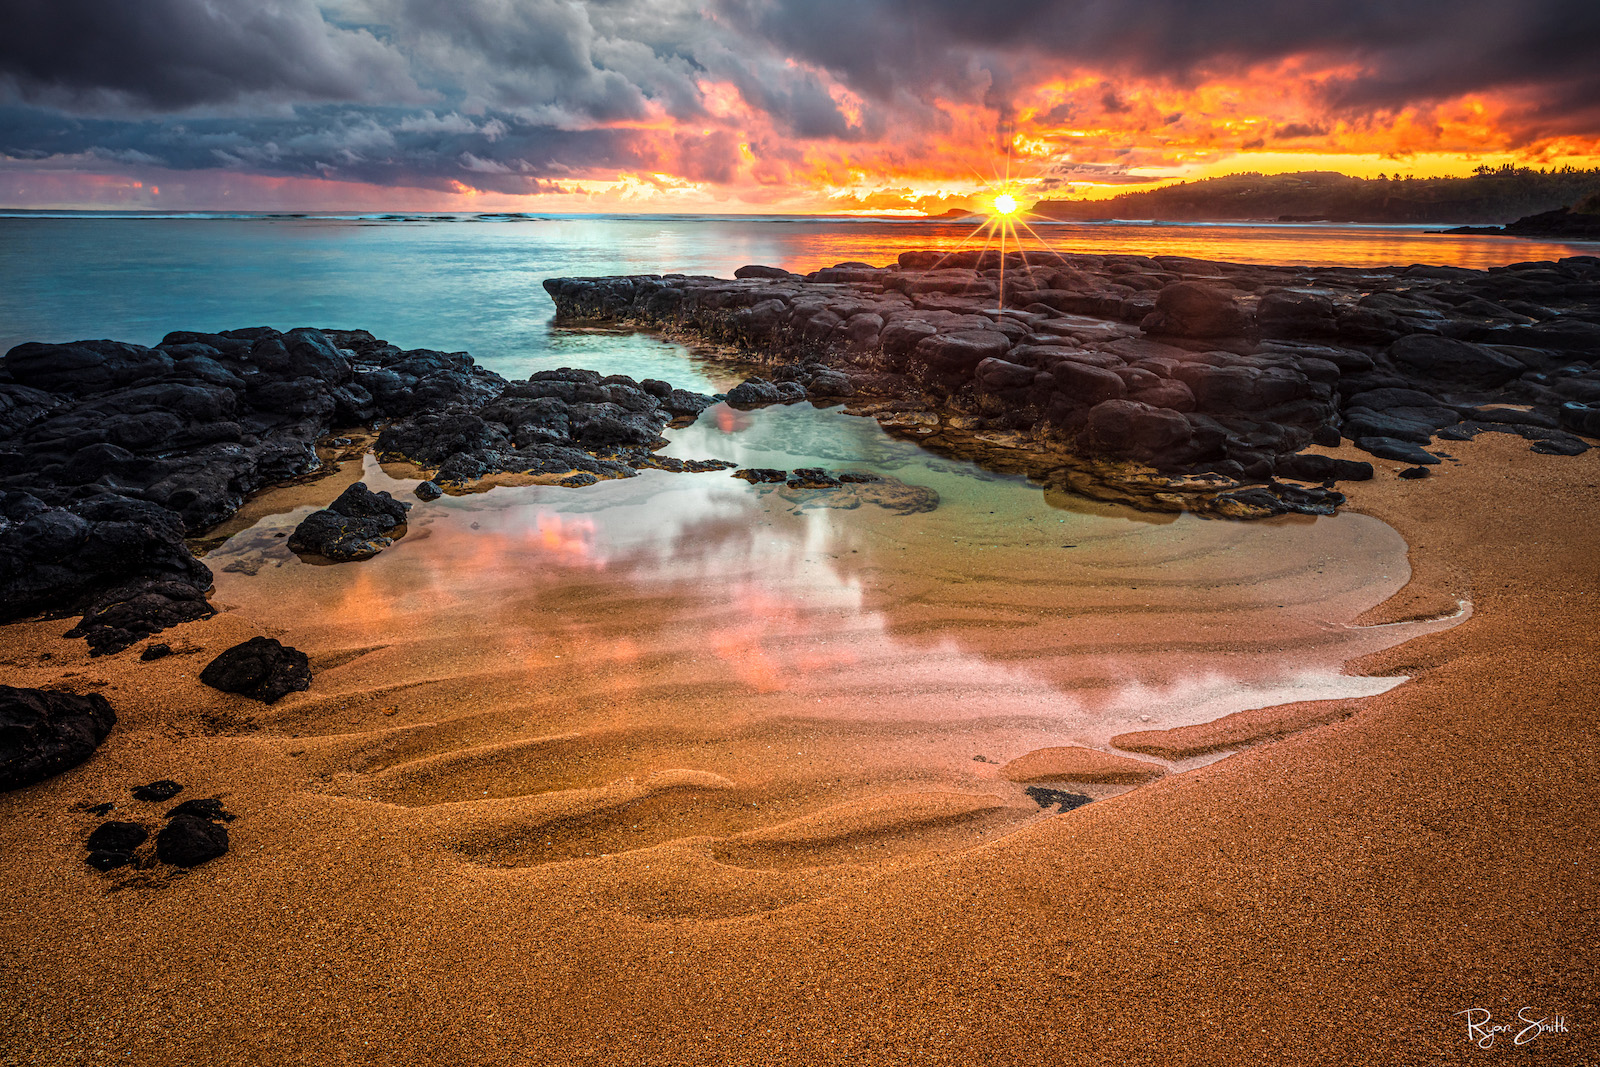 The sand in a small tide pool holds a wave-like pattern while along the rocky shore aqua blue water gently comes in and on the right reflects the orange sunset.